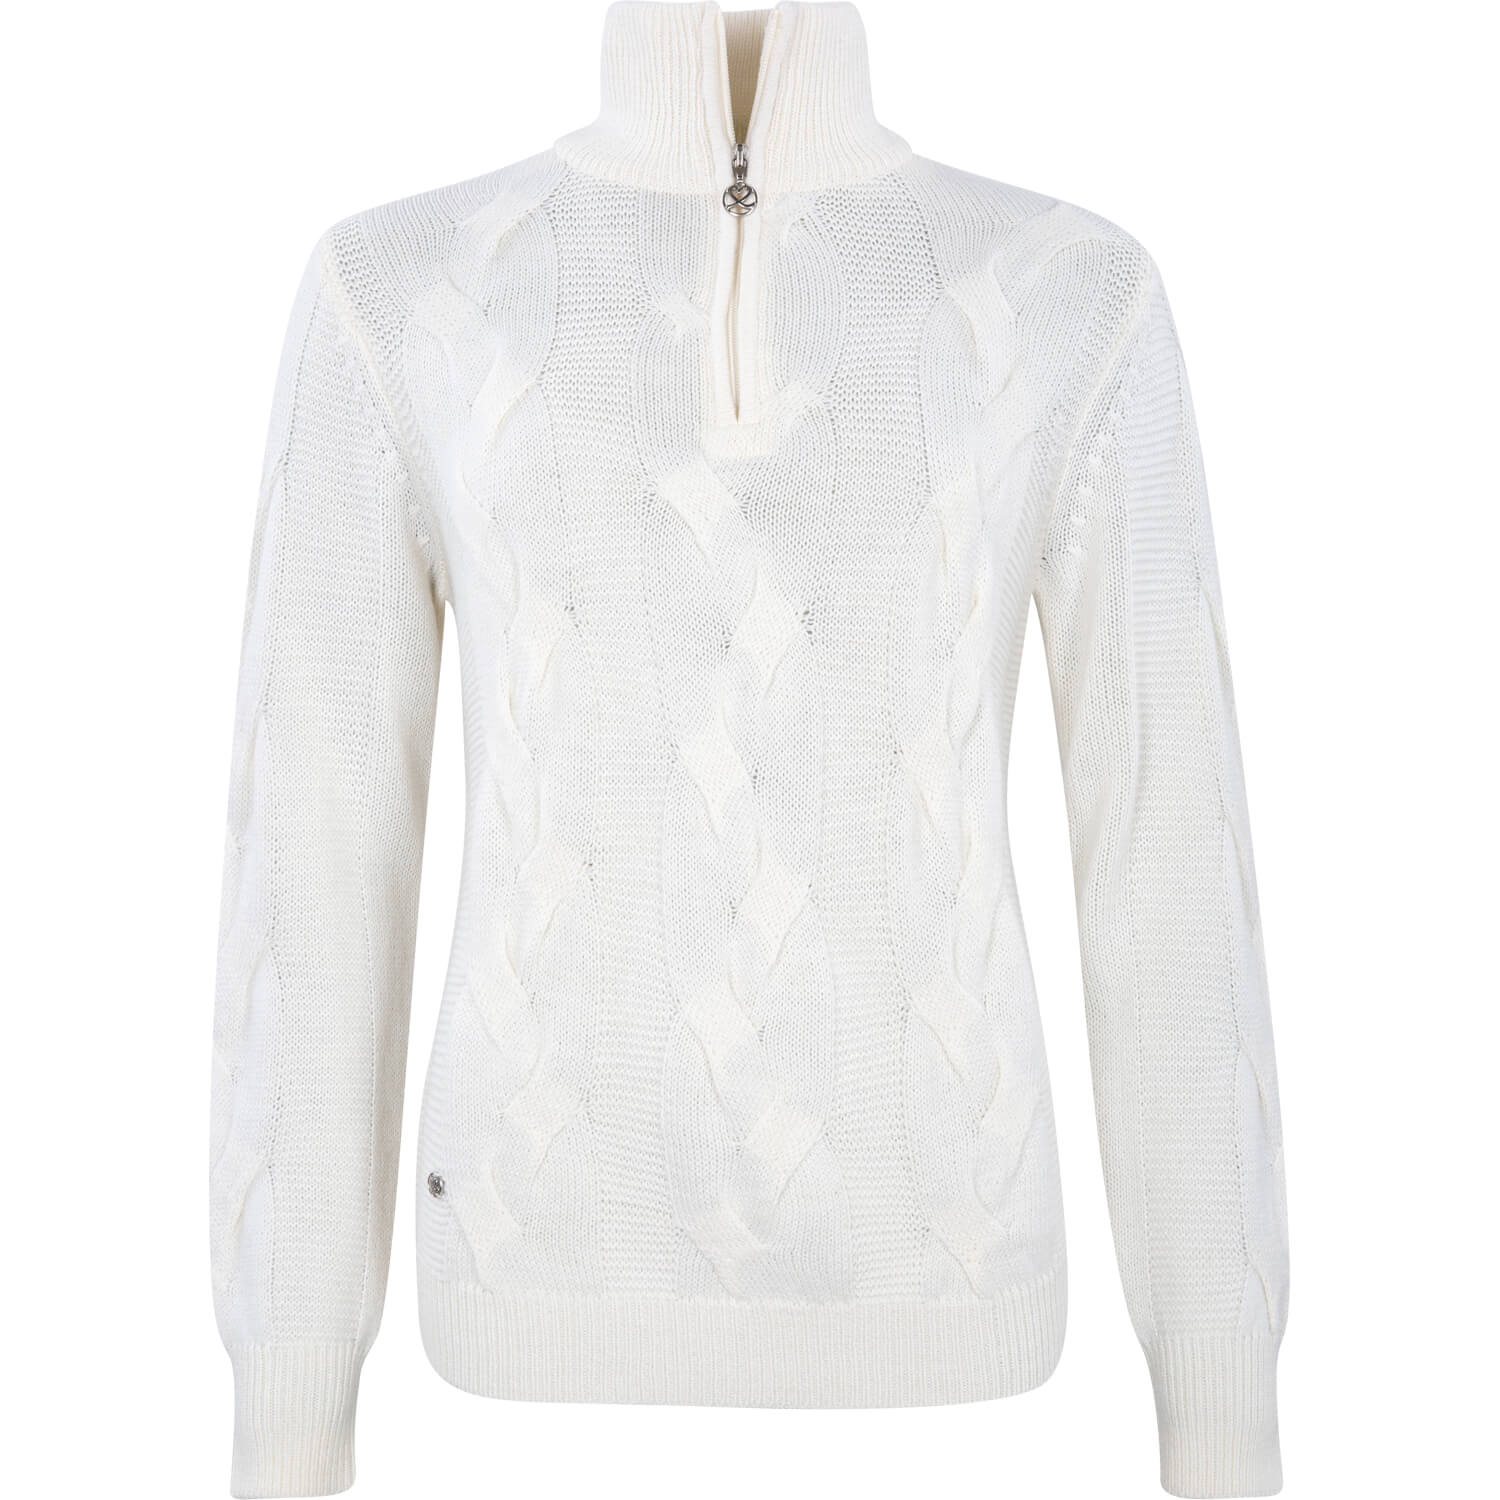 Daily Sports Addie Lined Pullover White